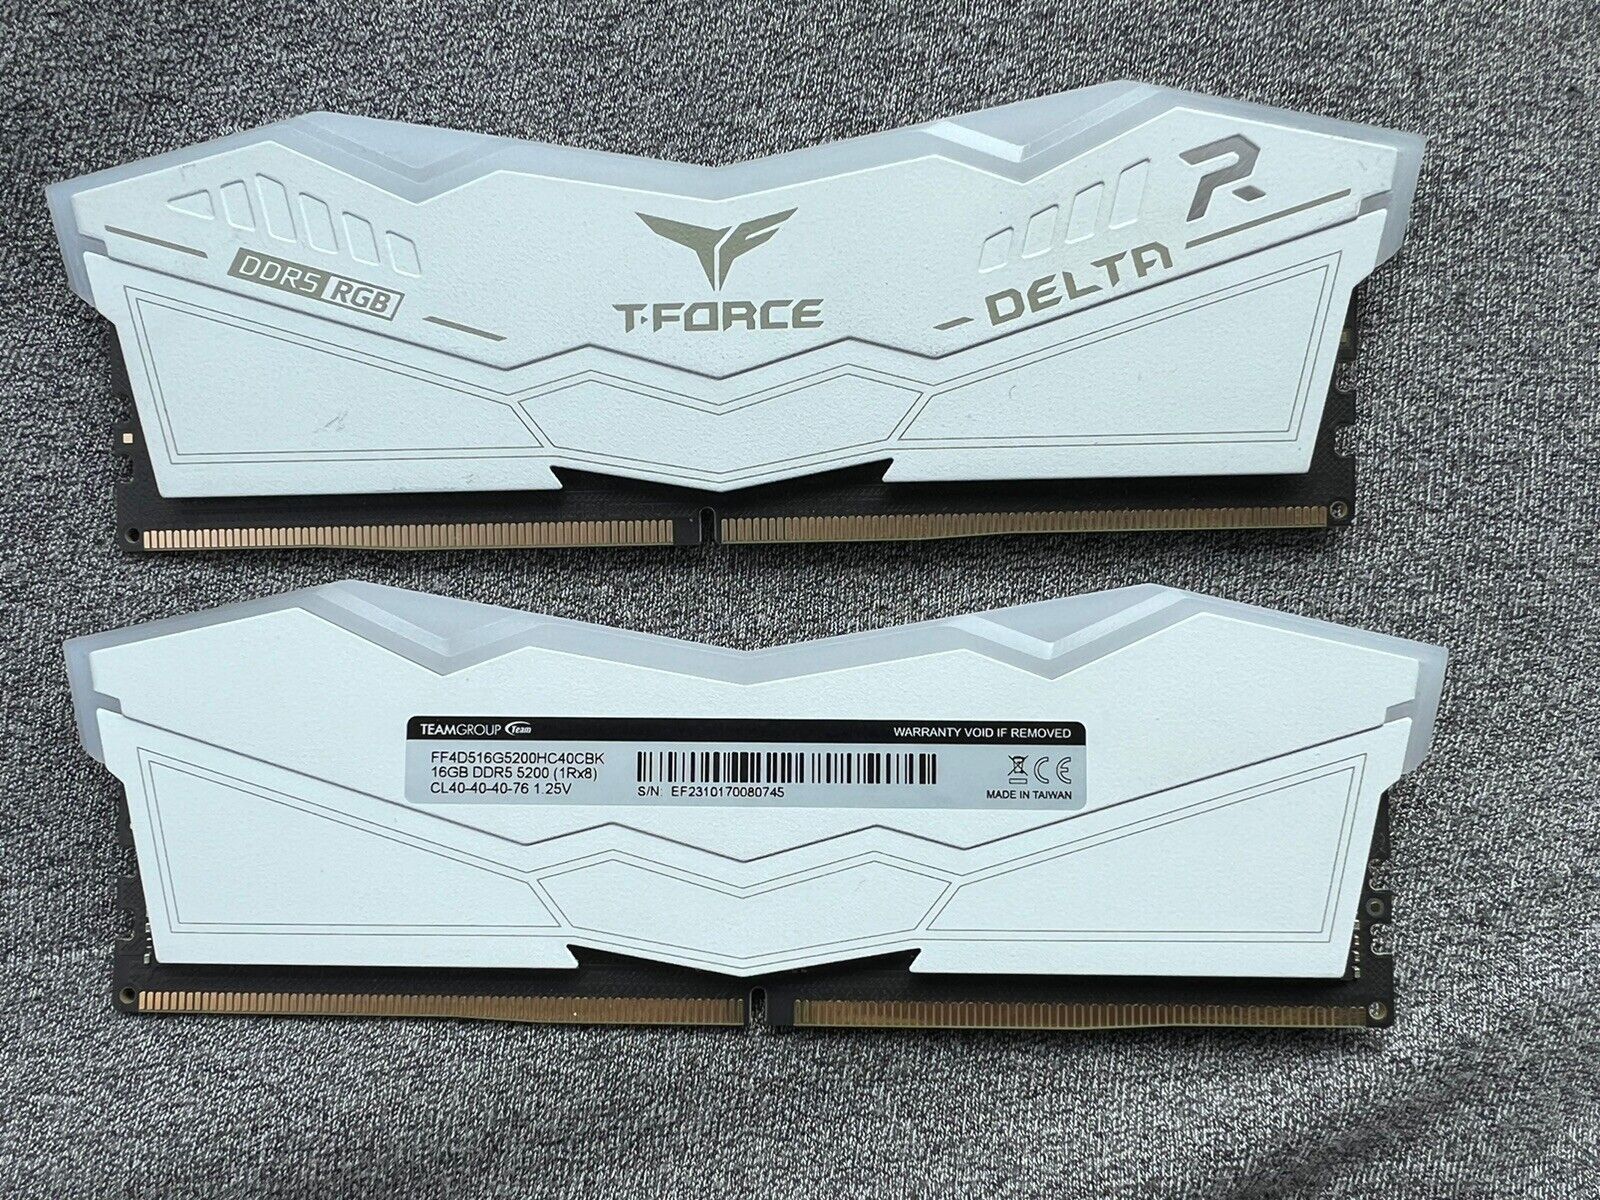 TEAMGROUP T-FORCE DELTA RGB 32GB (2 x 16GB) PC5-41600 (DDR5-5200) DIMM Memory -